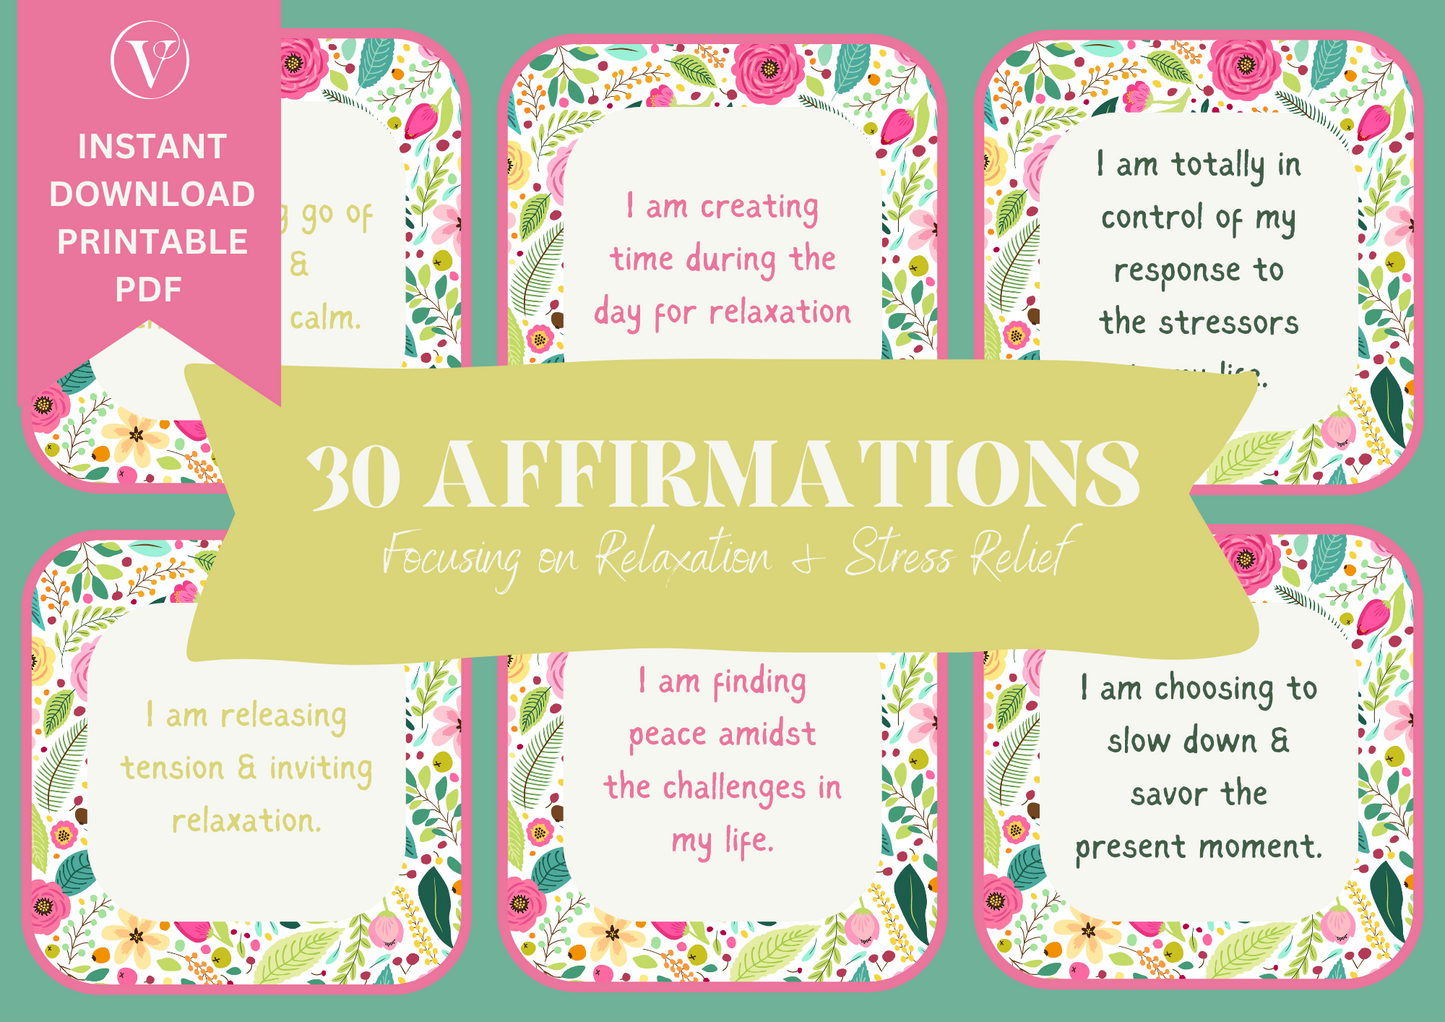 Affirmation Card Printable - Focusing on Relaxation & Stress Relief